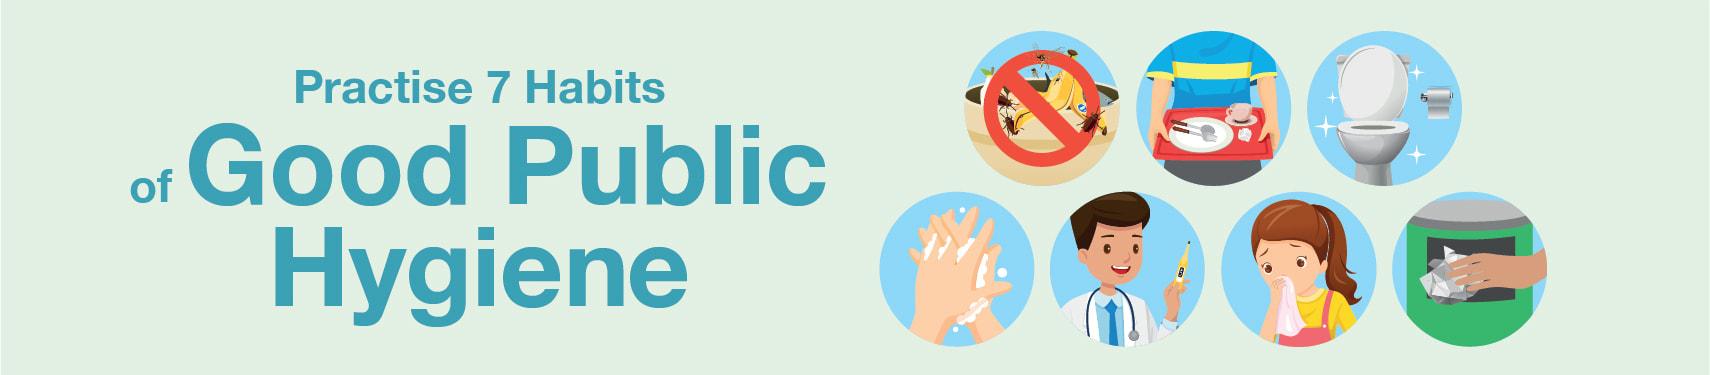 Picture of 7 habits for good public hygiene to protect Covid-19